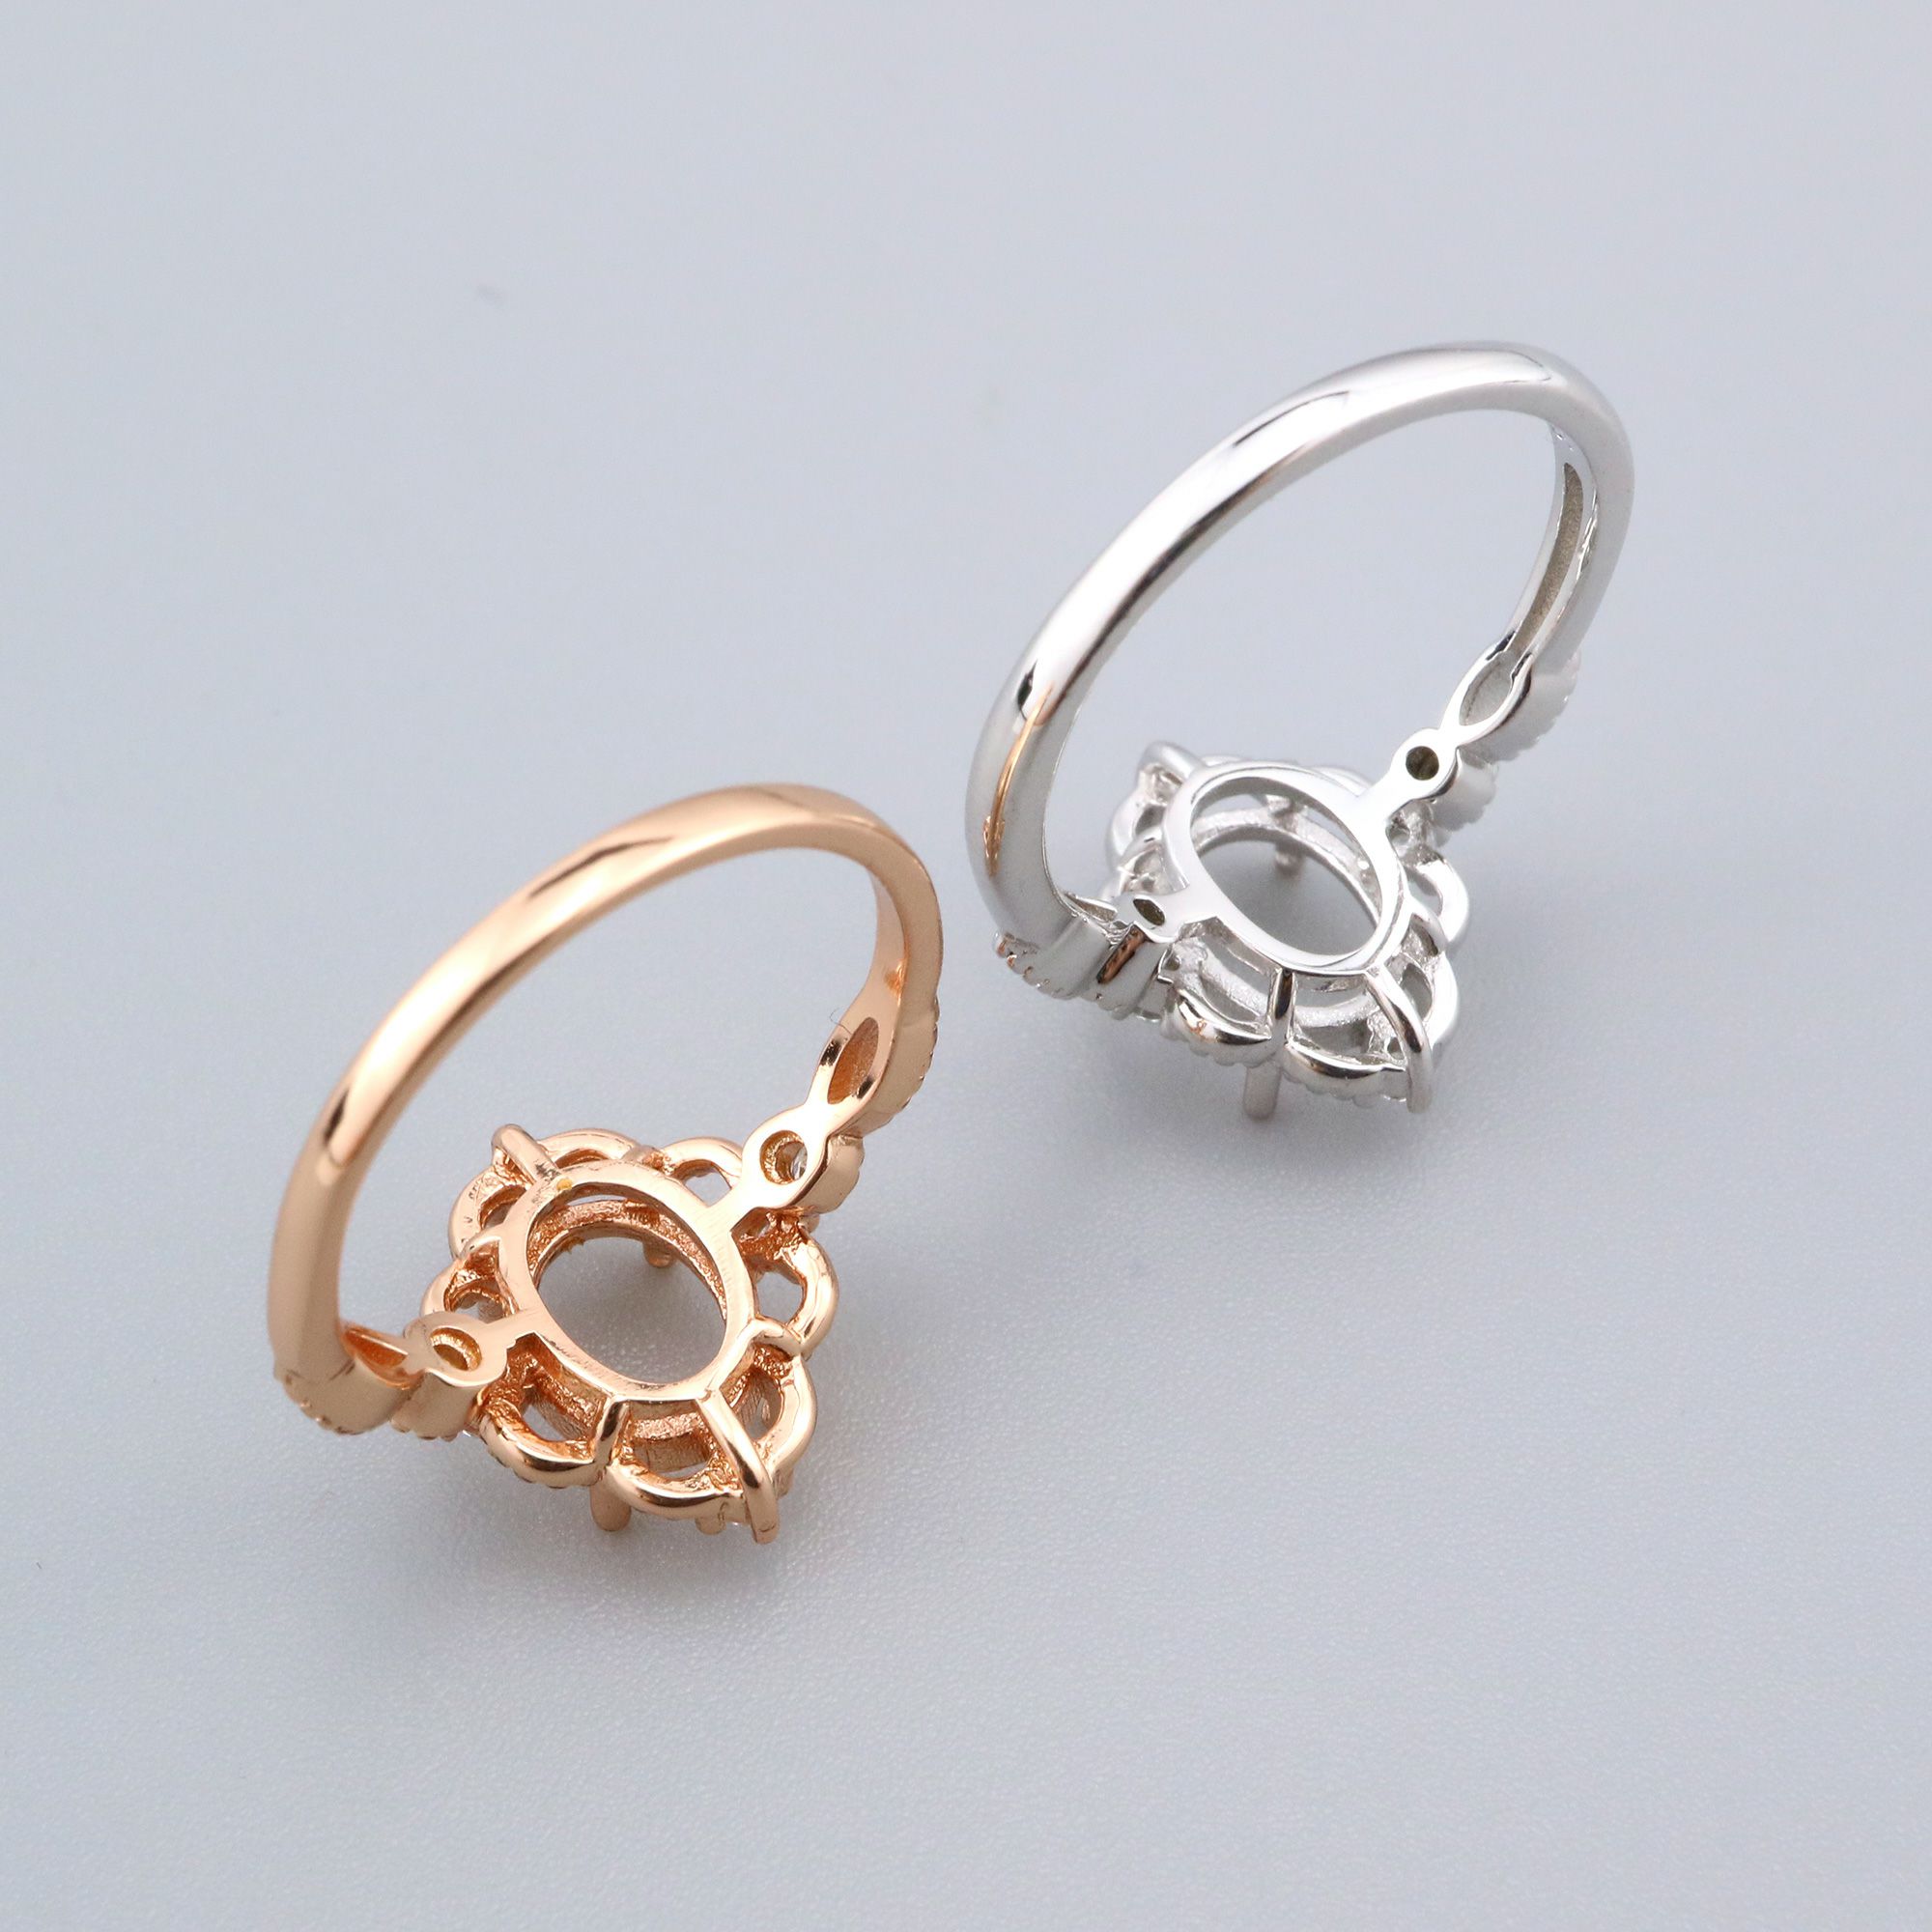 6x8MM Oval Prong Ring Settings Solid 925 Sterling Silver Rose Gold Plated Vintage Style Lace Set Size DIY Ring Bezel for Gemstone Supplies 1224084 - Click Image to Close